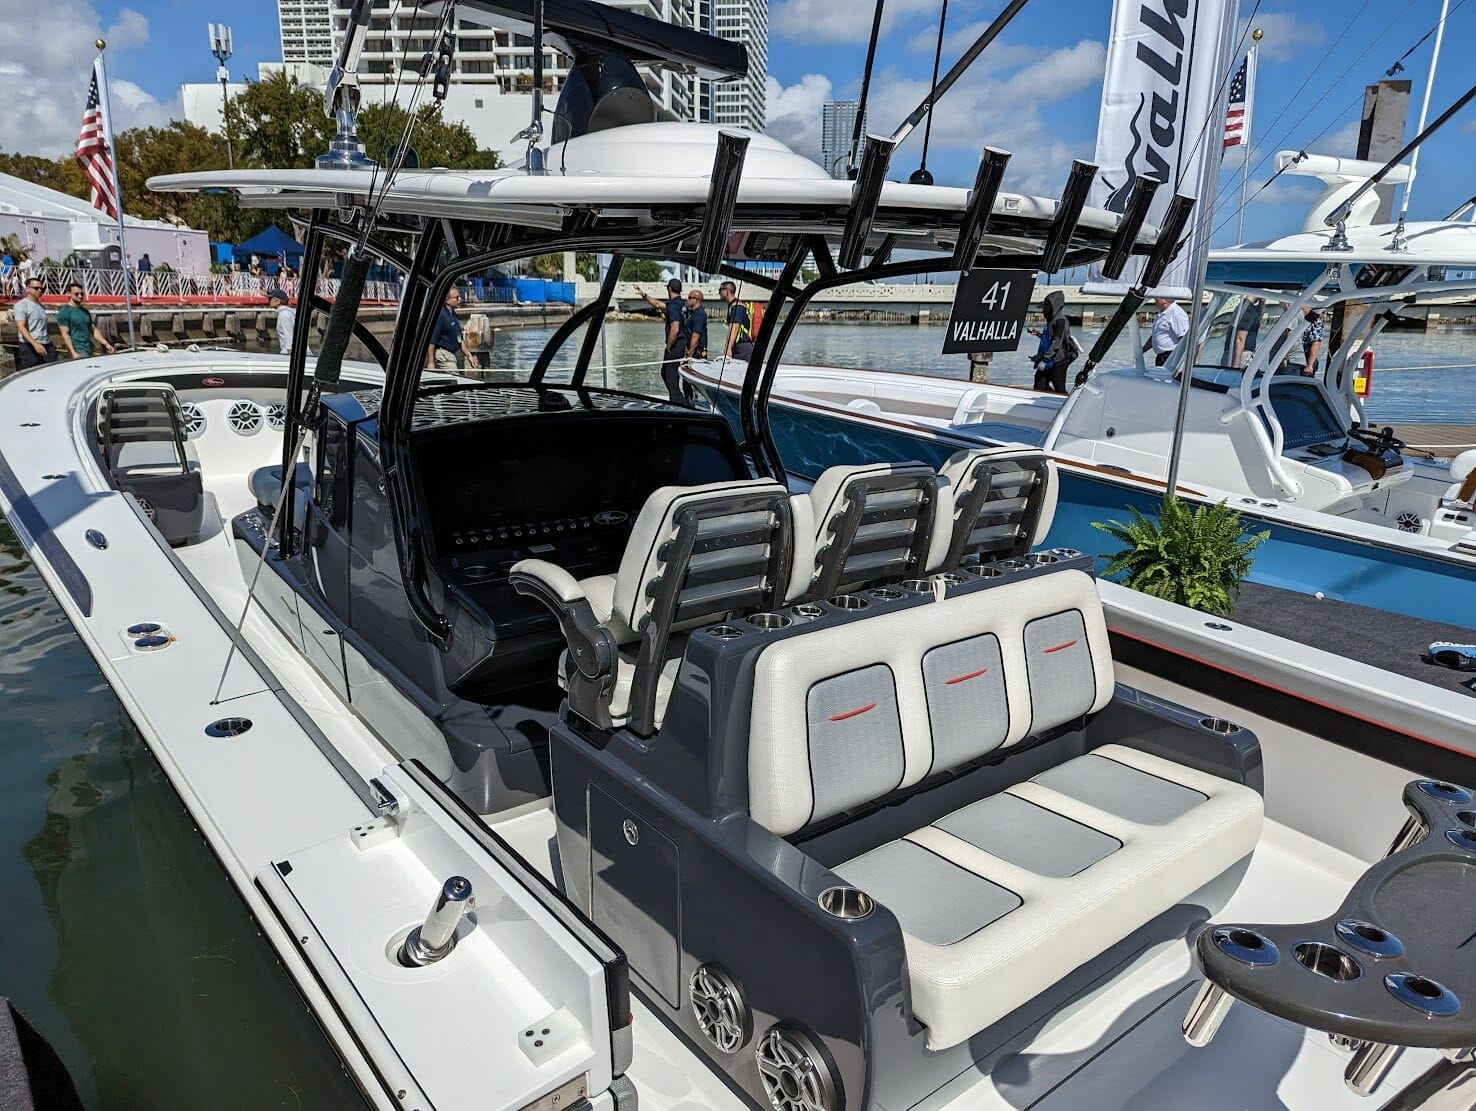 Boat Purchase Agreement: All You Need to Know